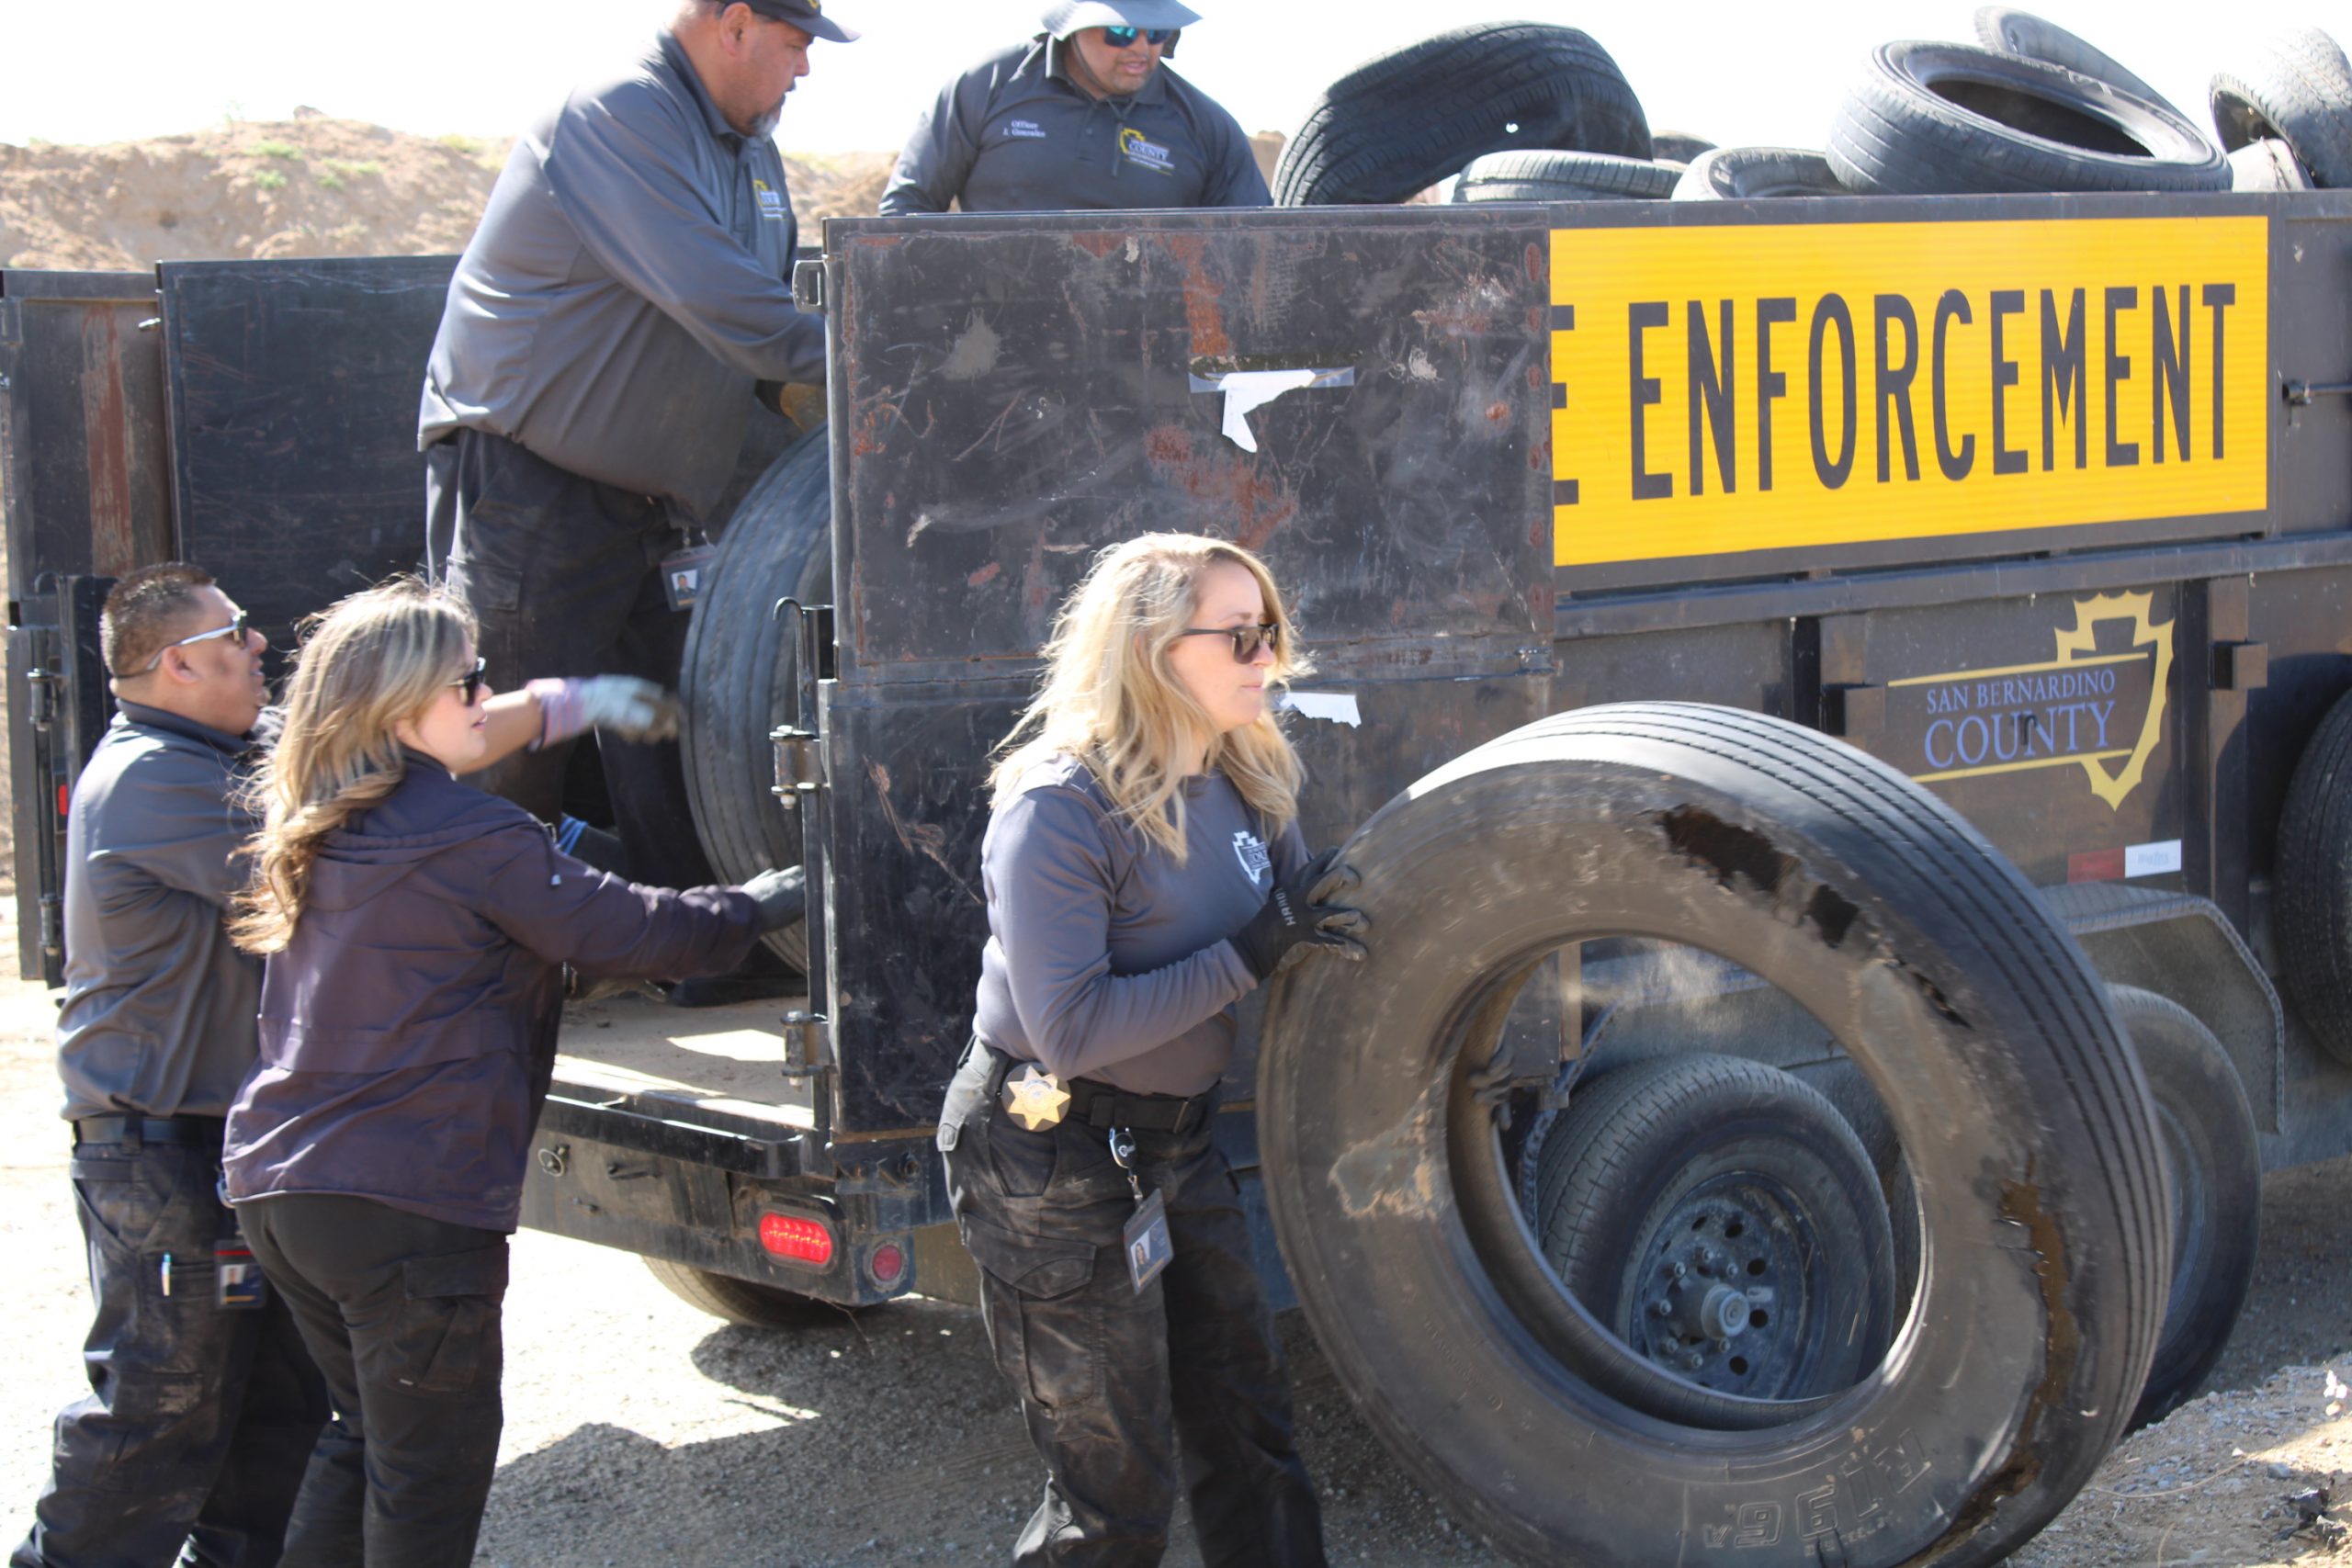 A photo of Code Enforcement staff loading up a truck in the desert with old tires.